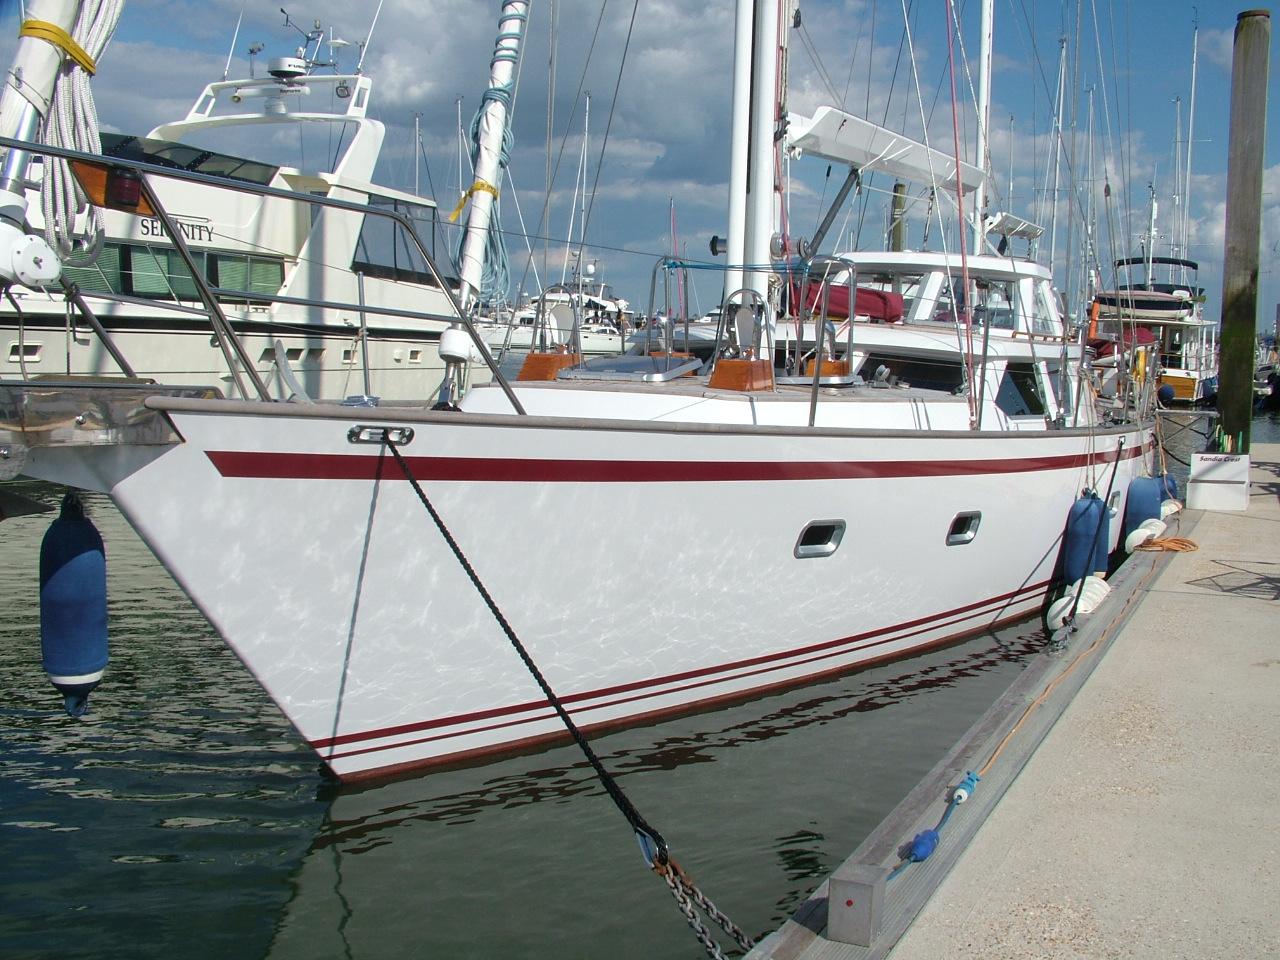 dixon 62 - ketch rig steel yacht boat for sale